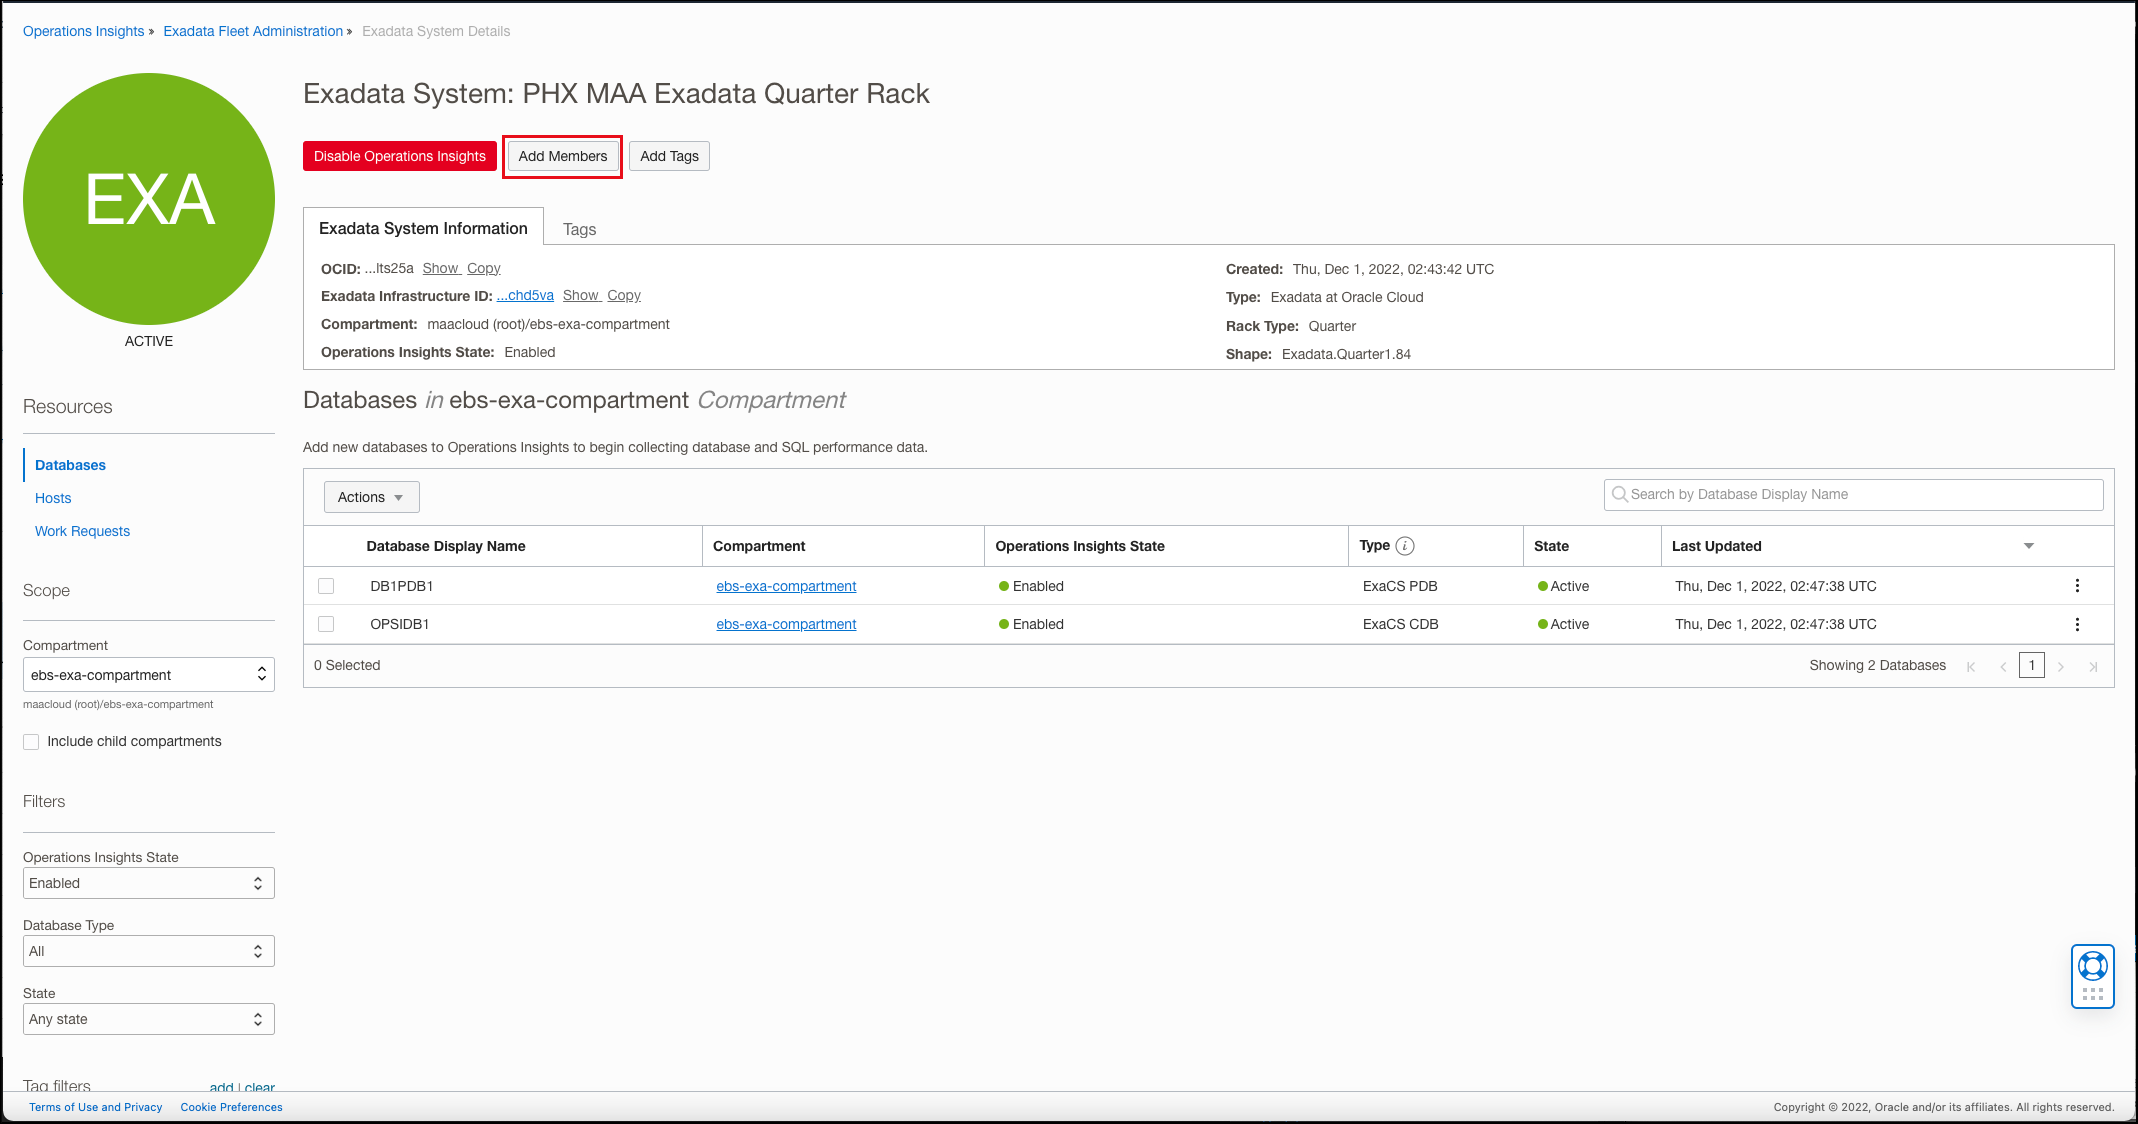 Image shows the Exadata Details page.